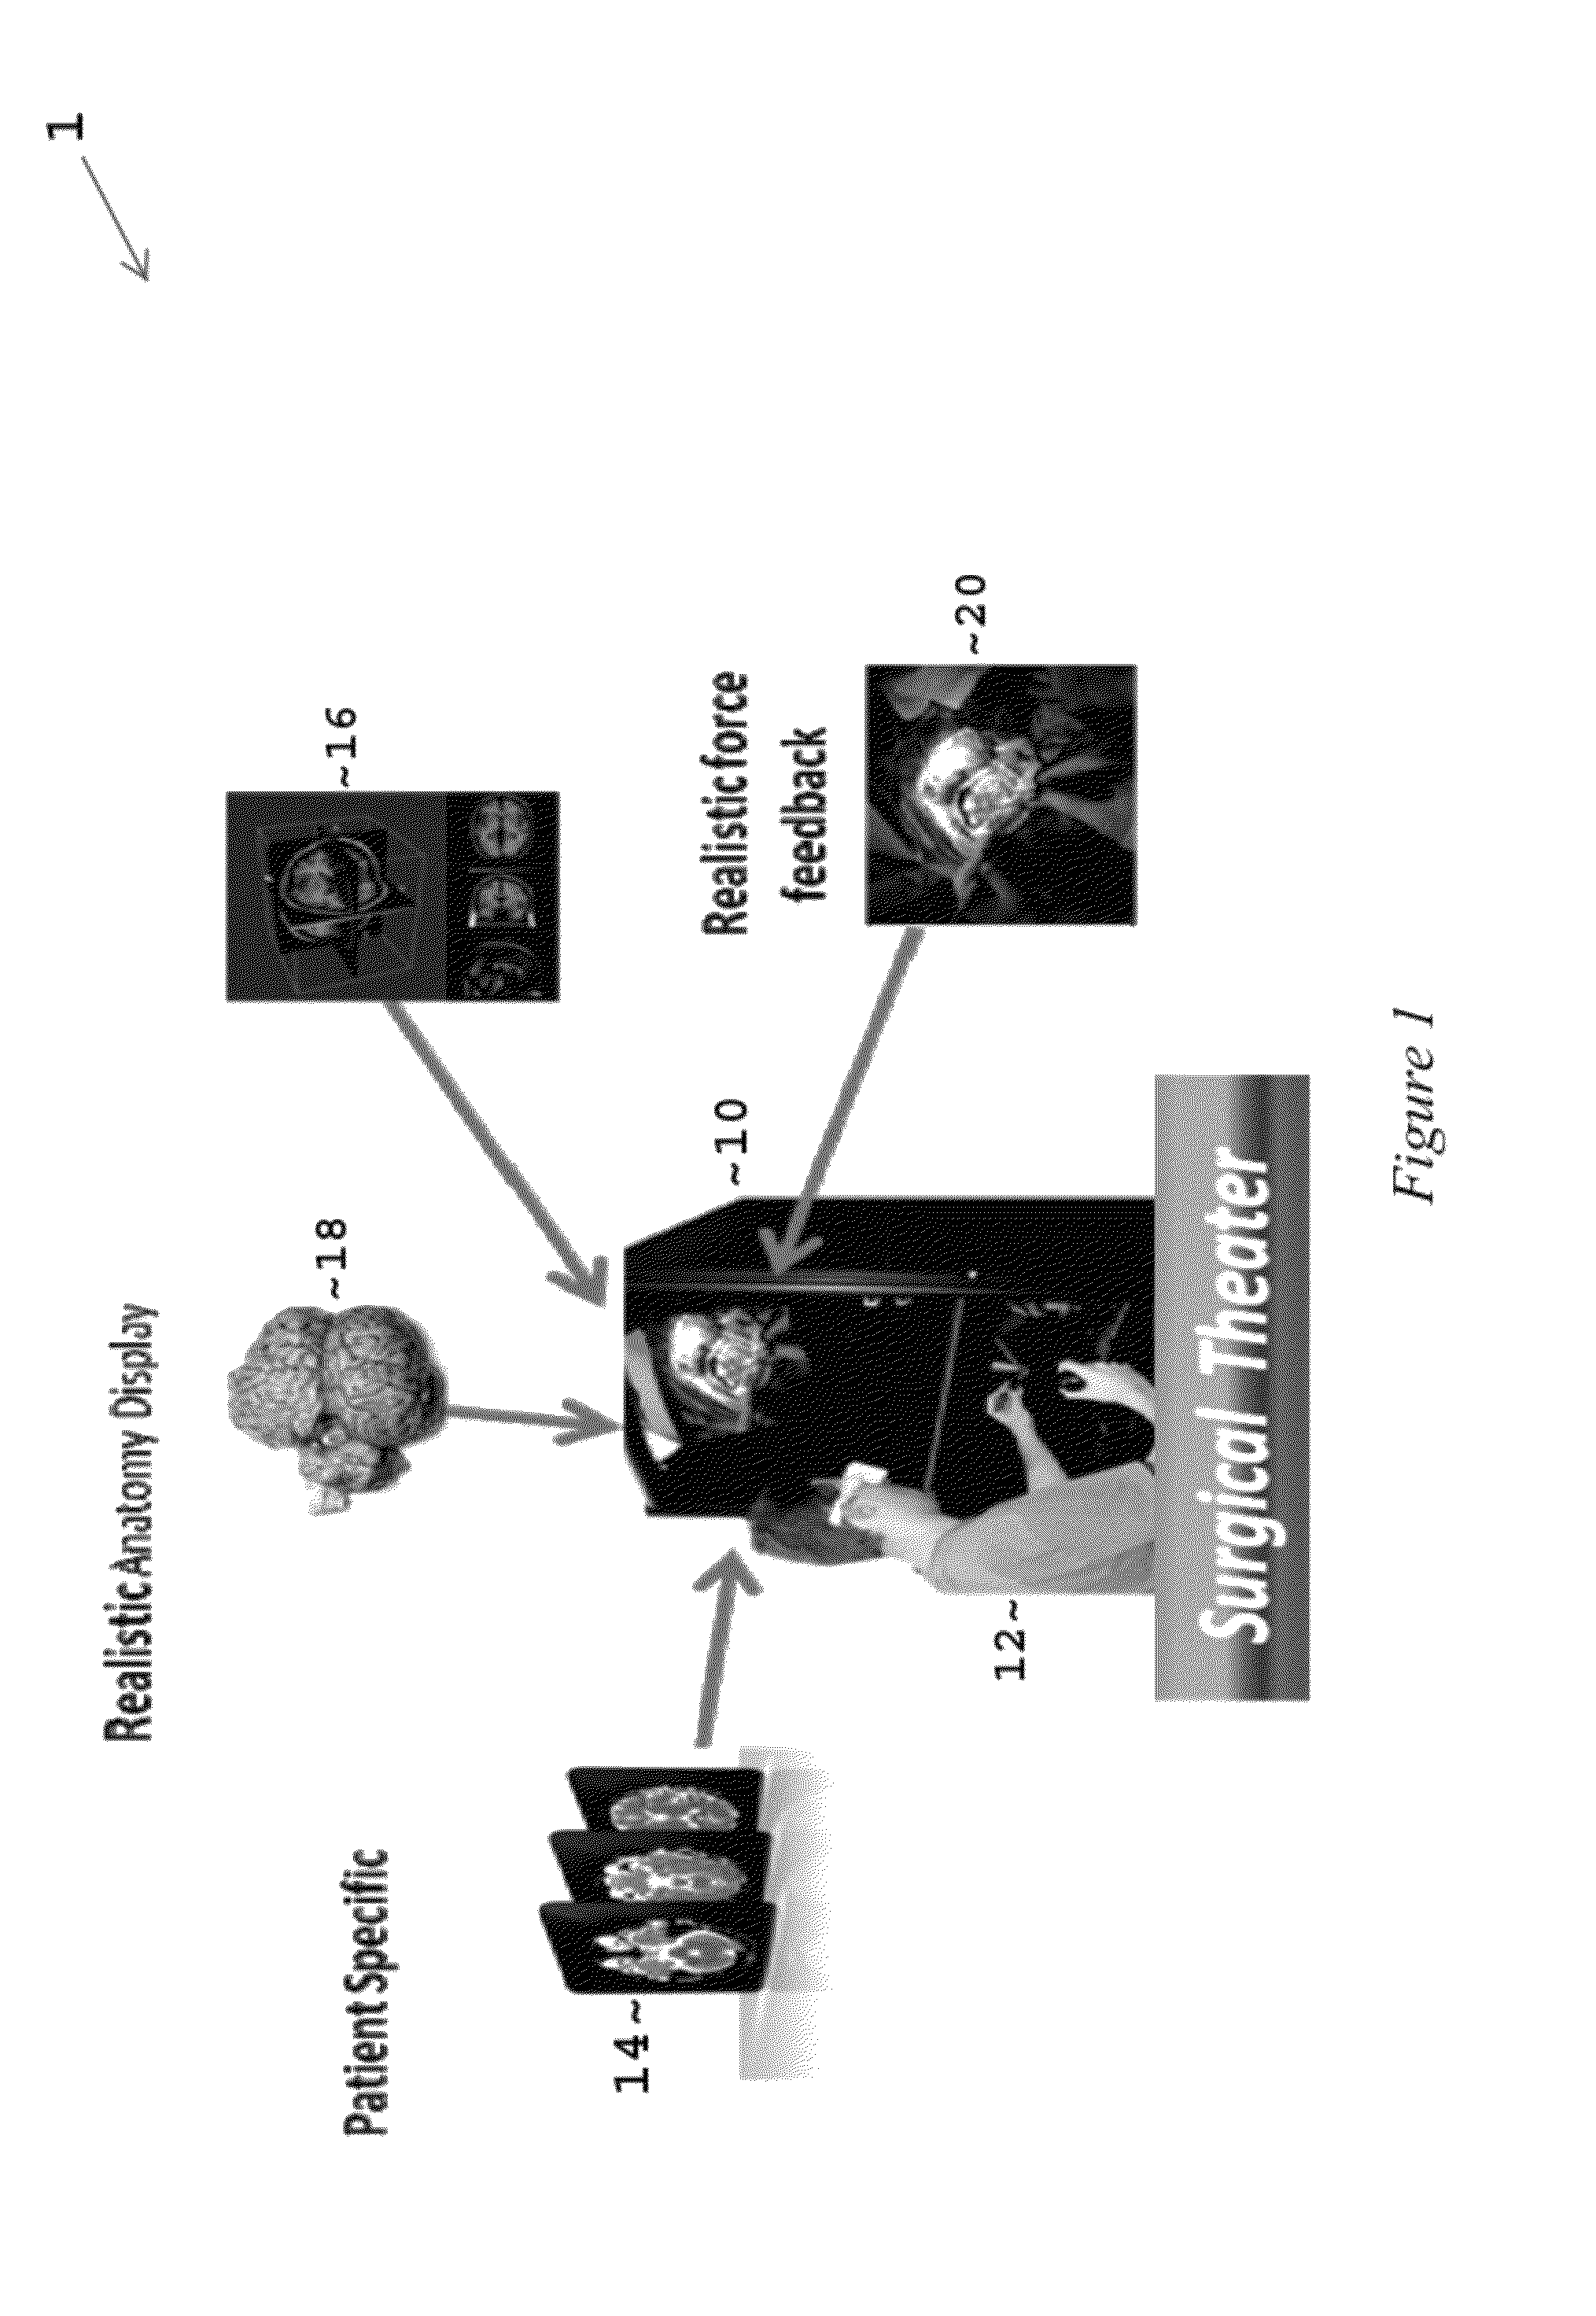 Method and system for simulating surgical procedures